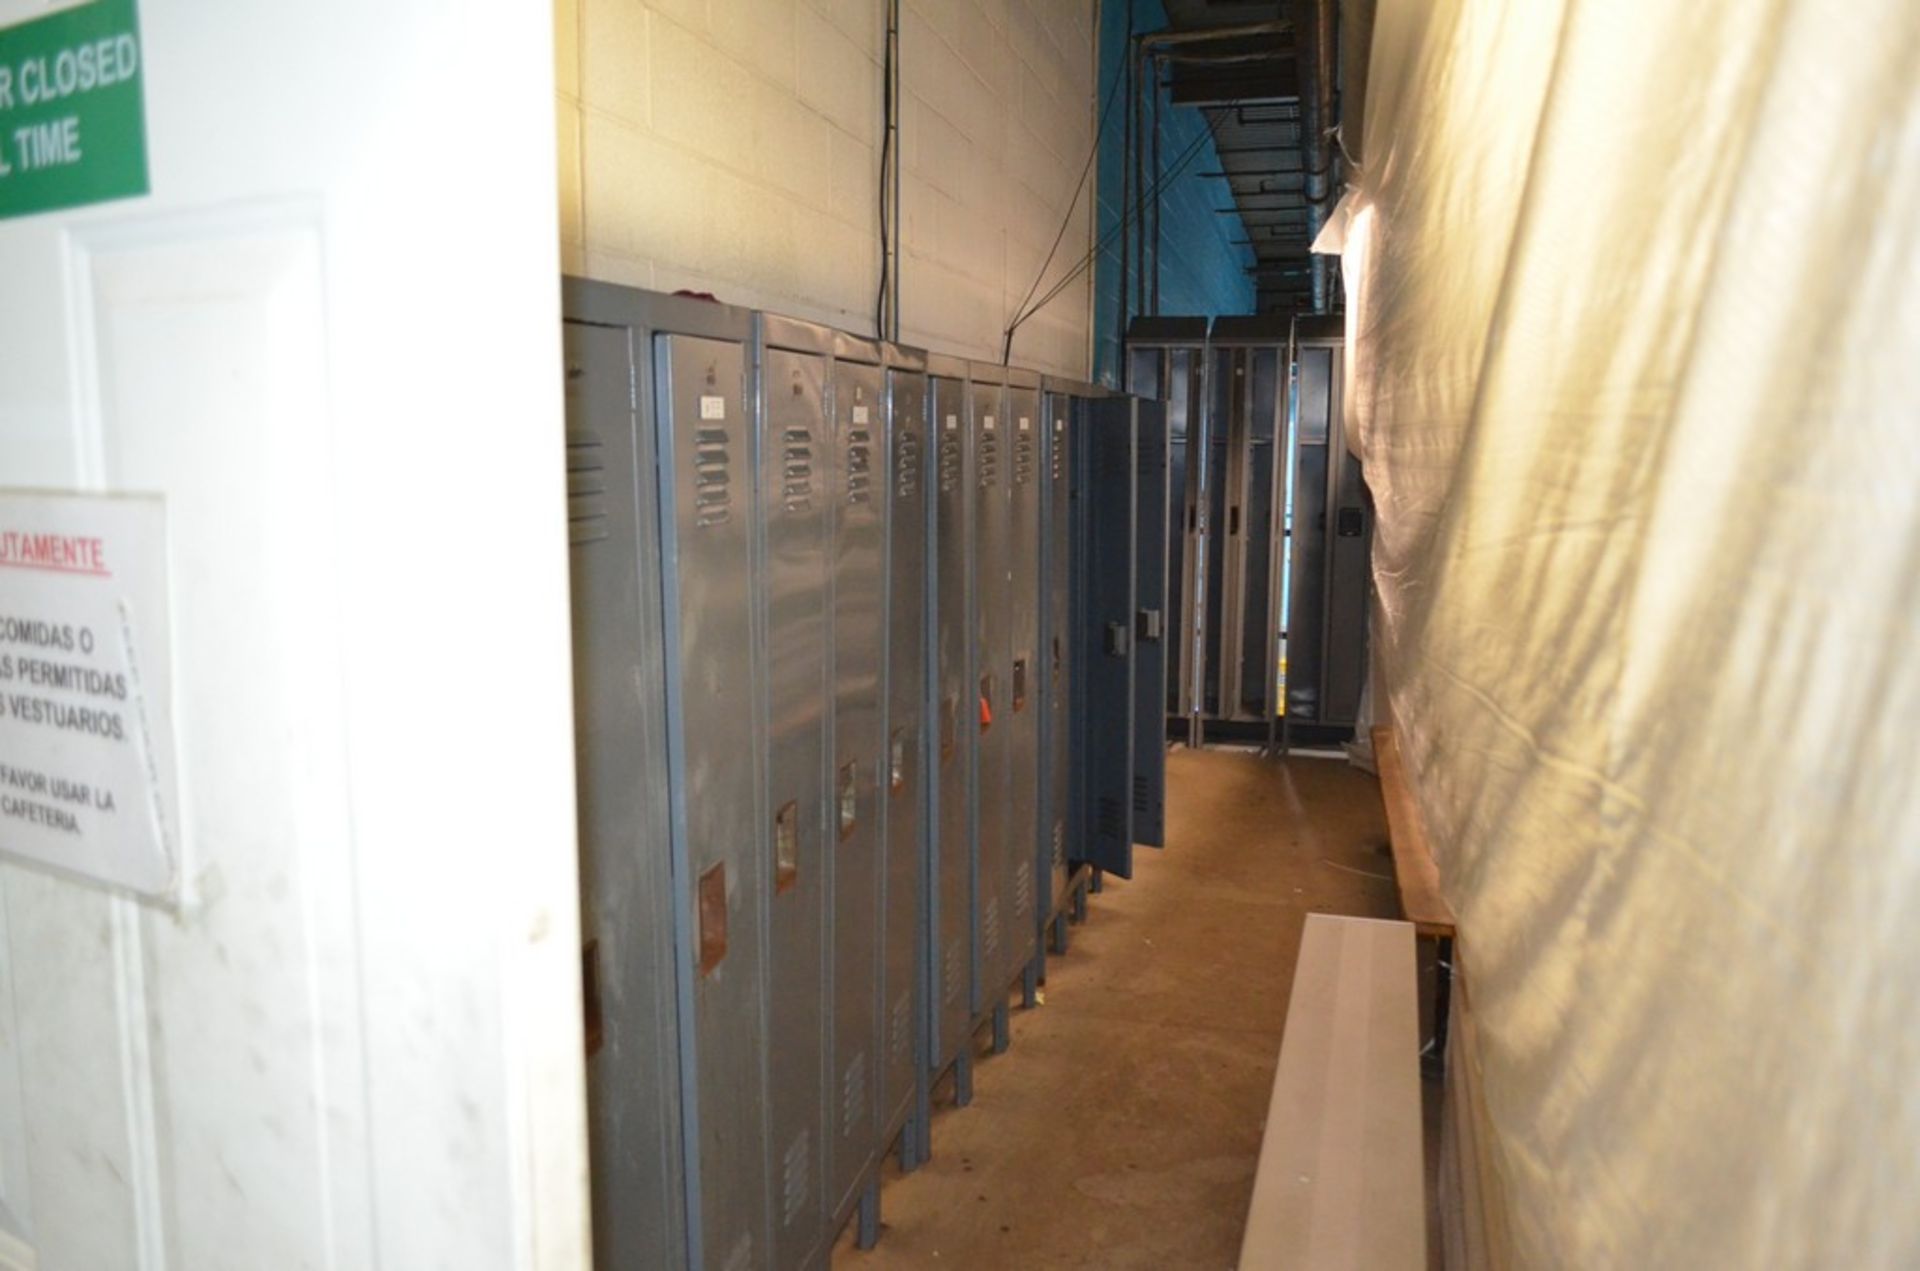 (Approx) 120 Lockers; Location in Plant: Outside Main Offices on Mezzanine - Image 2 of 4